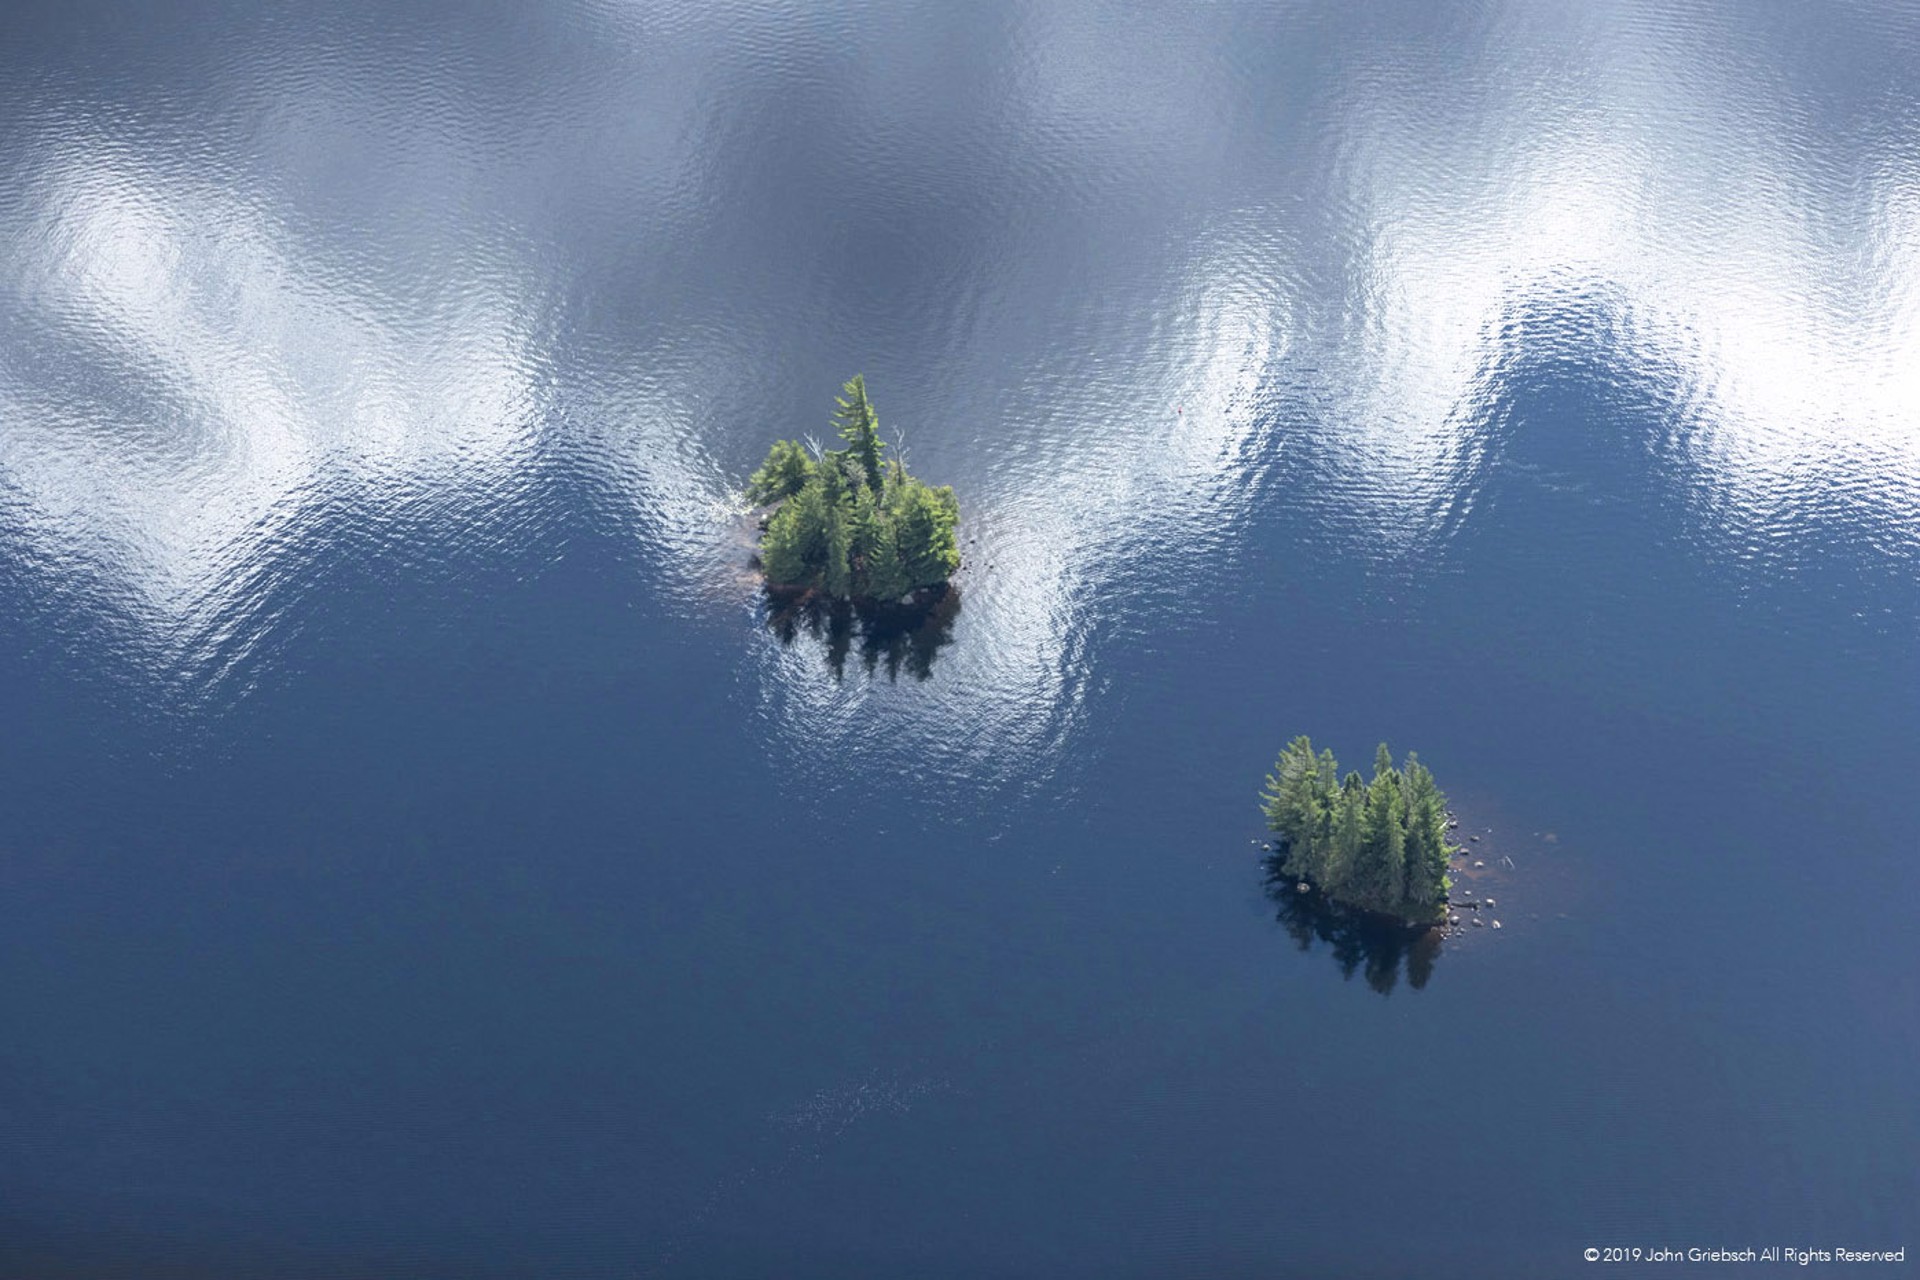 Two Islands and Cloud Reflections, Cranberry Lake, NY by John Griebsch